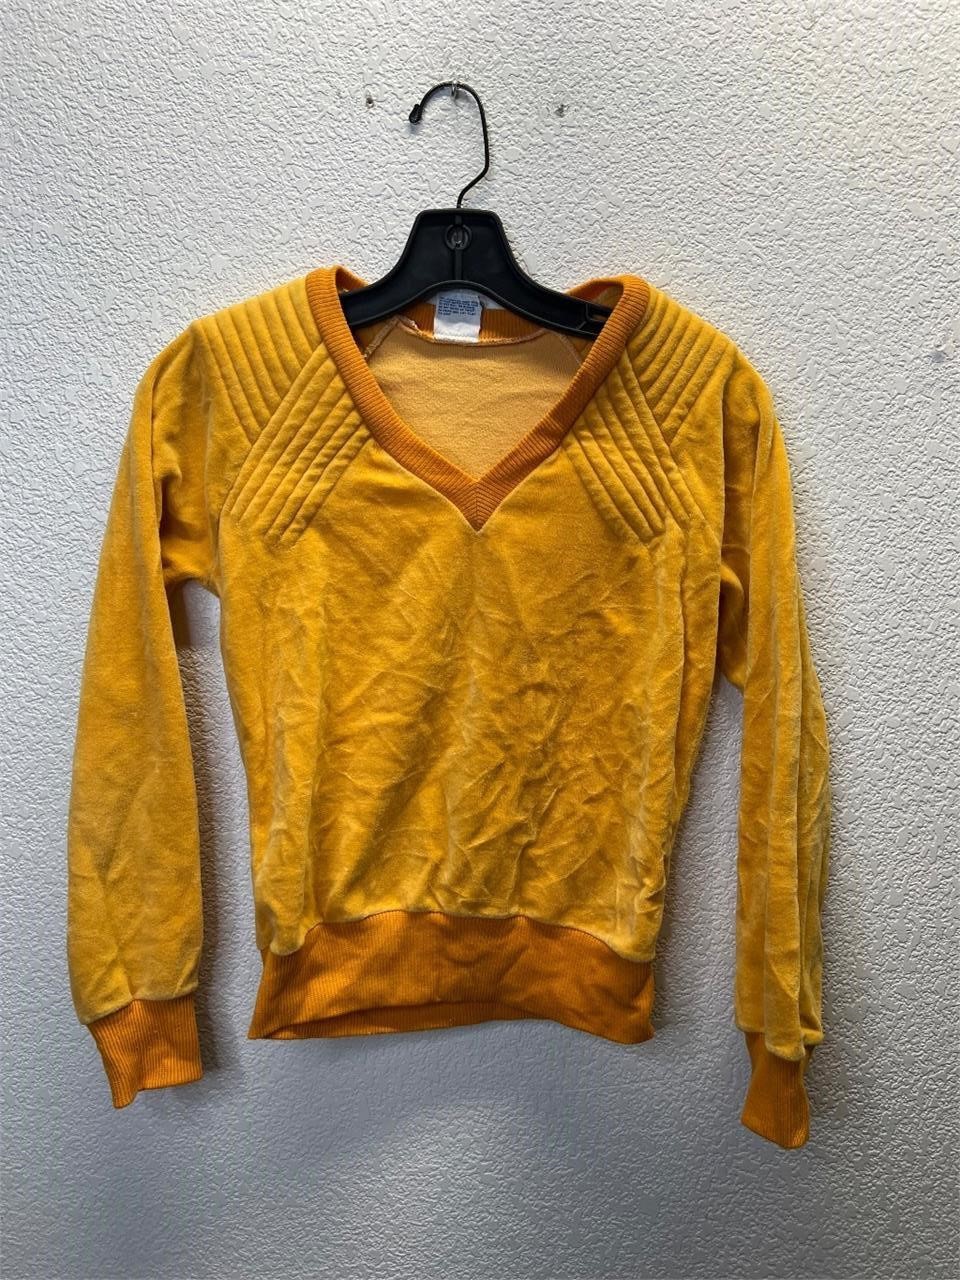 7/3/24 Vintage Clothing Auction